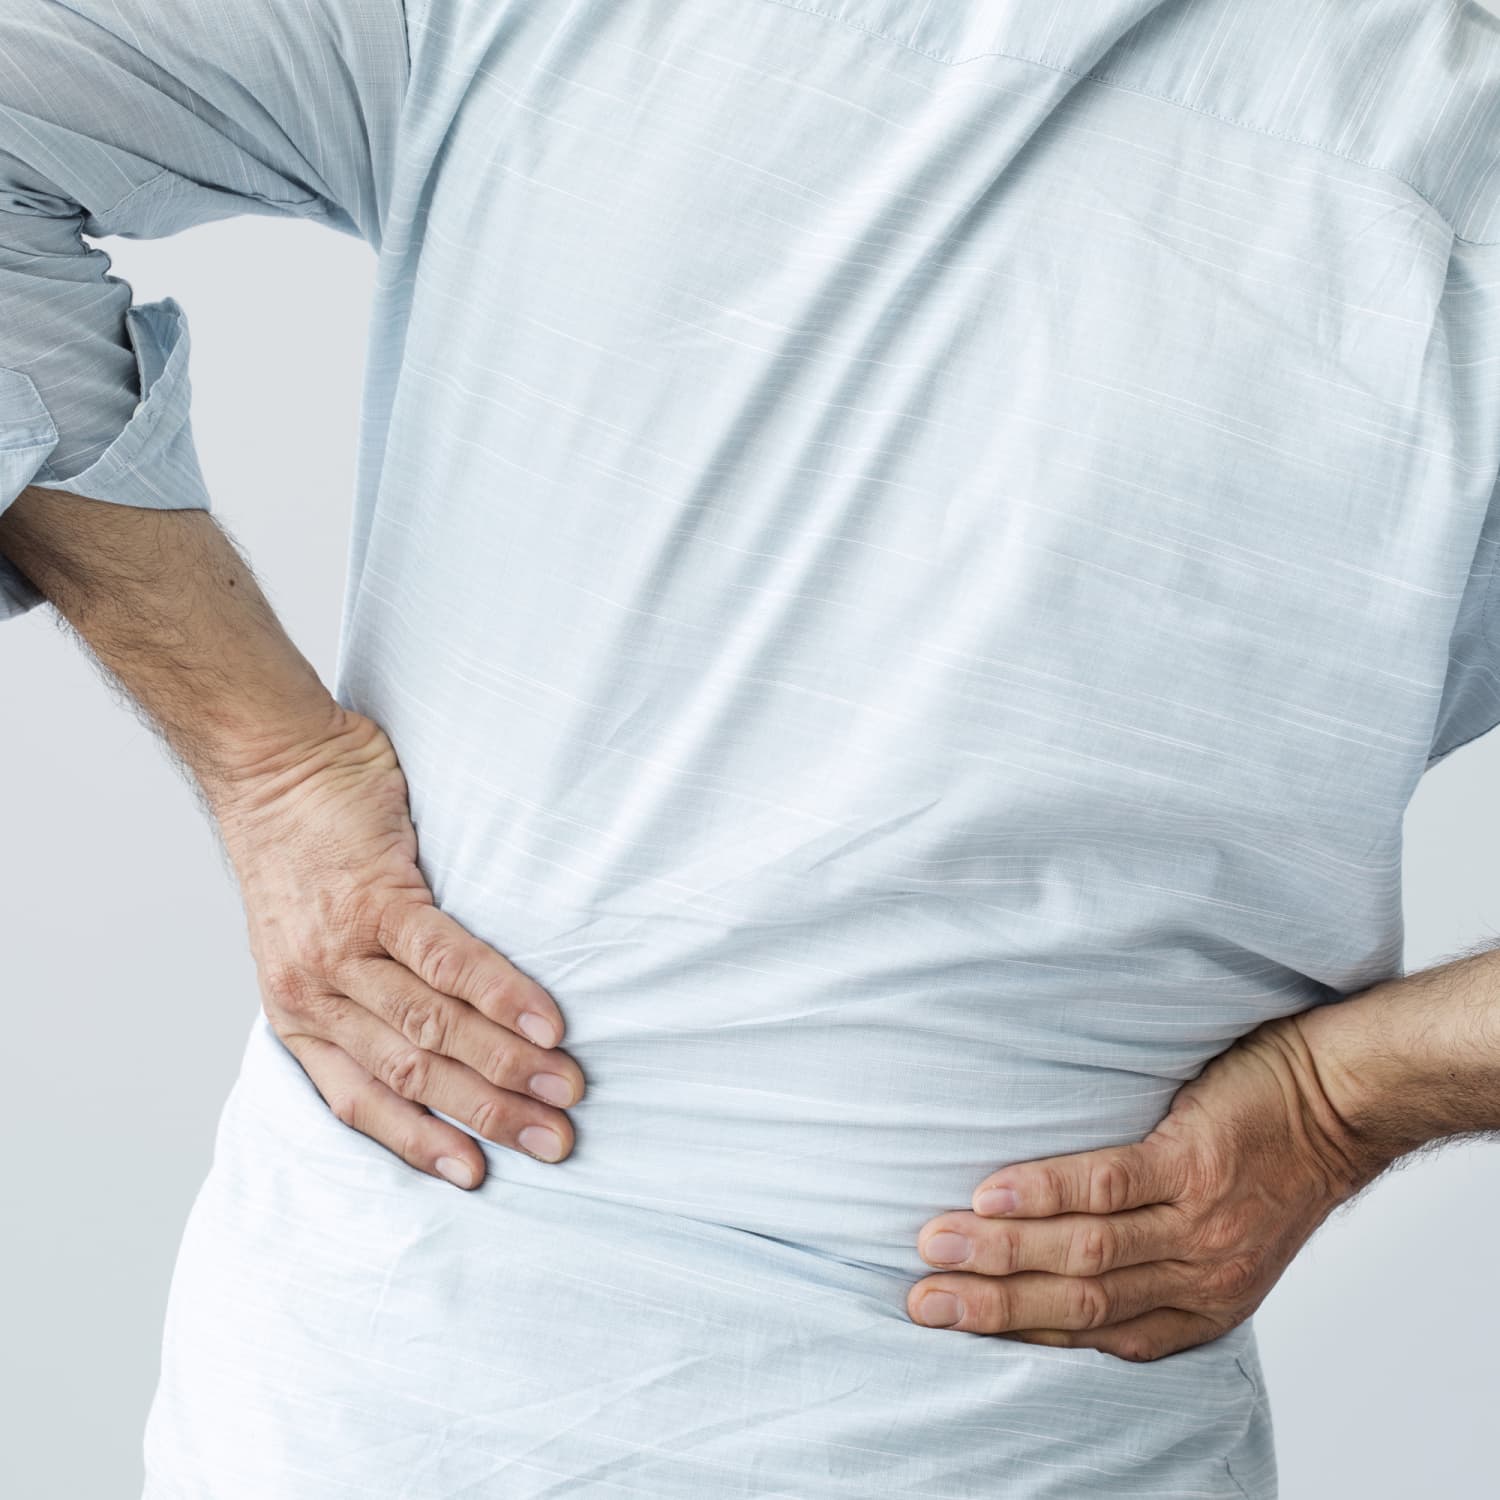 Broken back: Symptoms, treatment, and recovery